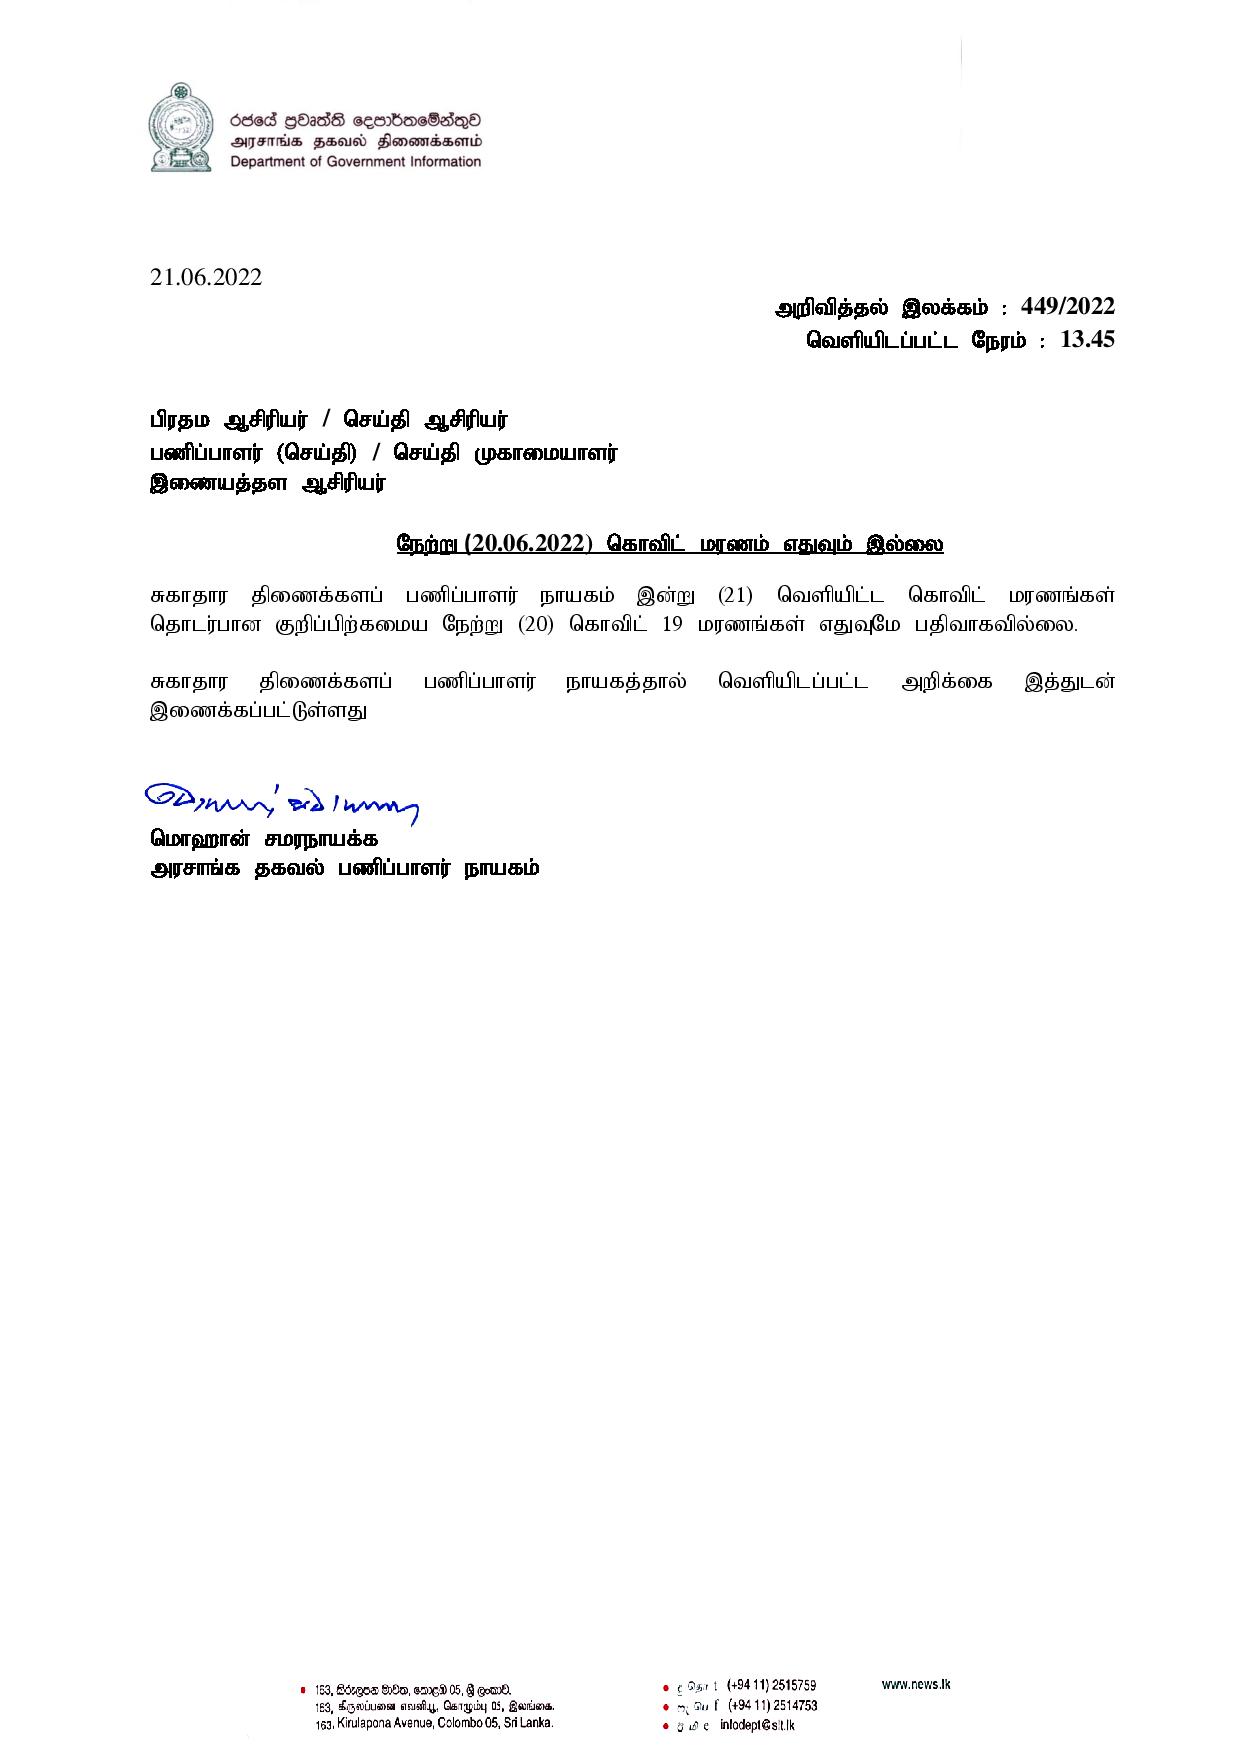 Press Release 449 Tamil page 001